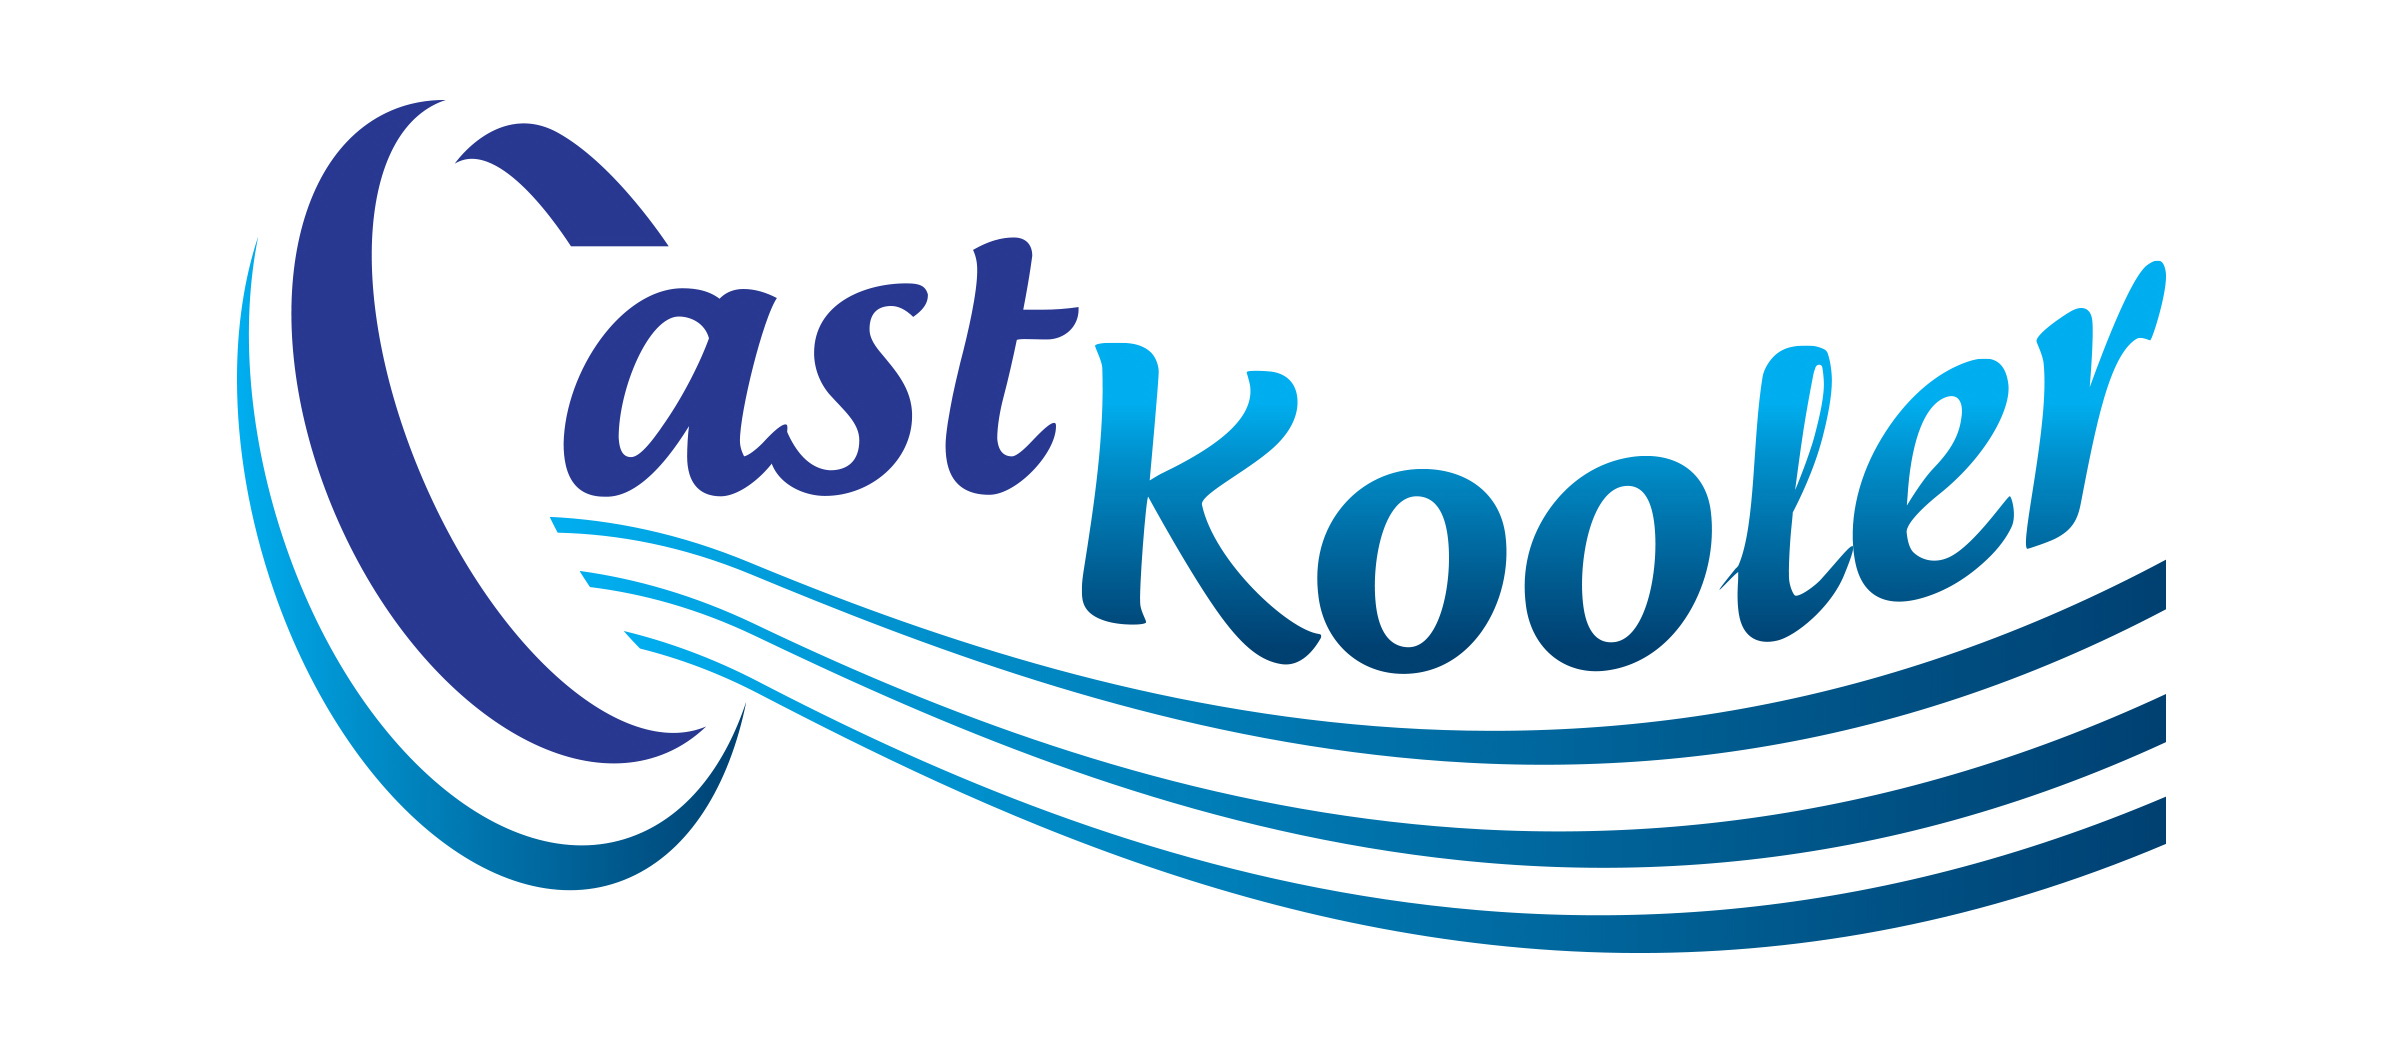 Cast Kooler, a medical invention designed to aid people with casts by providing comfort and relief.